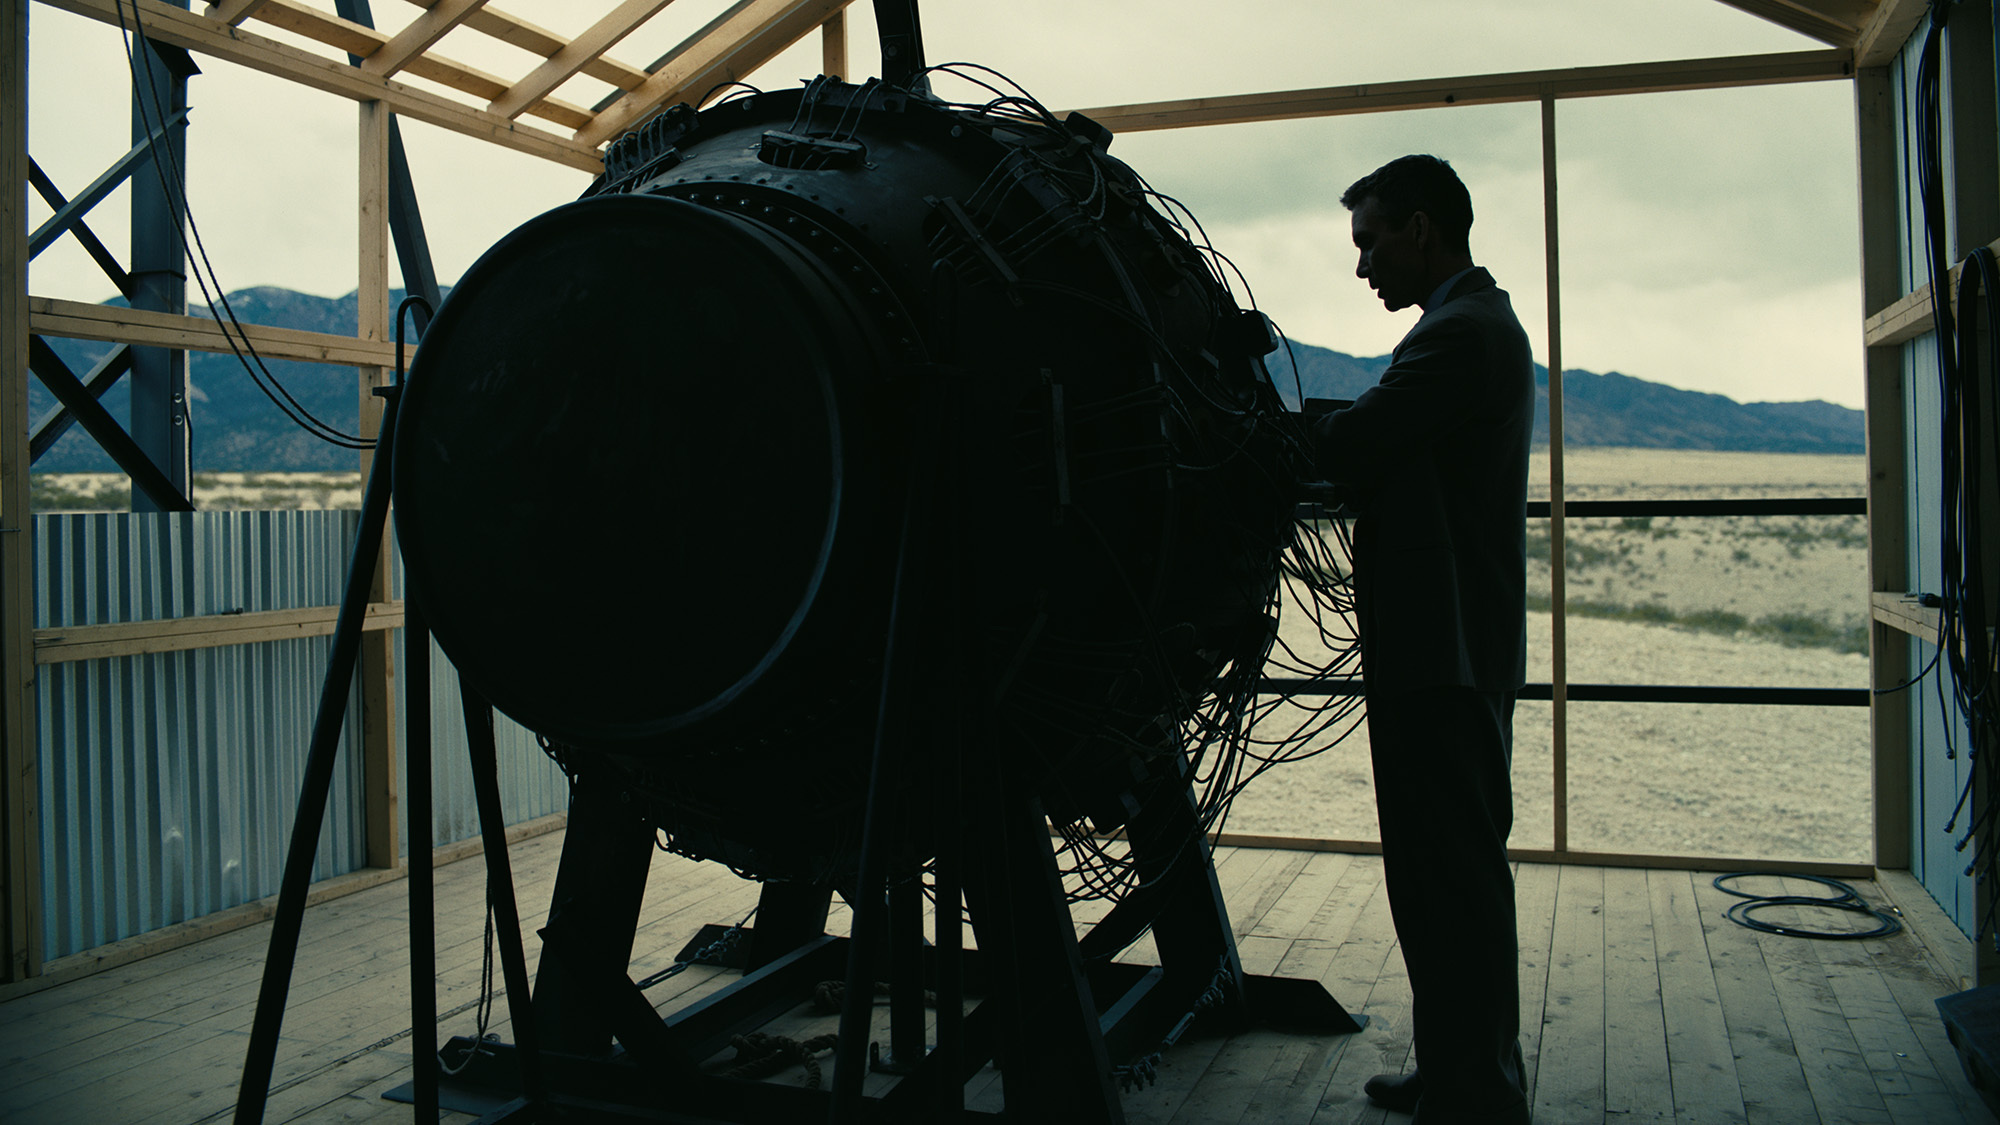 A still from the movie Oppenheimer showing the atomic bomb and Robert Oppenheimer next to one another